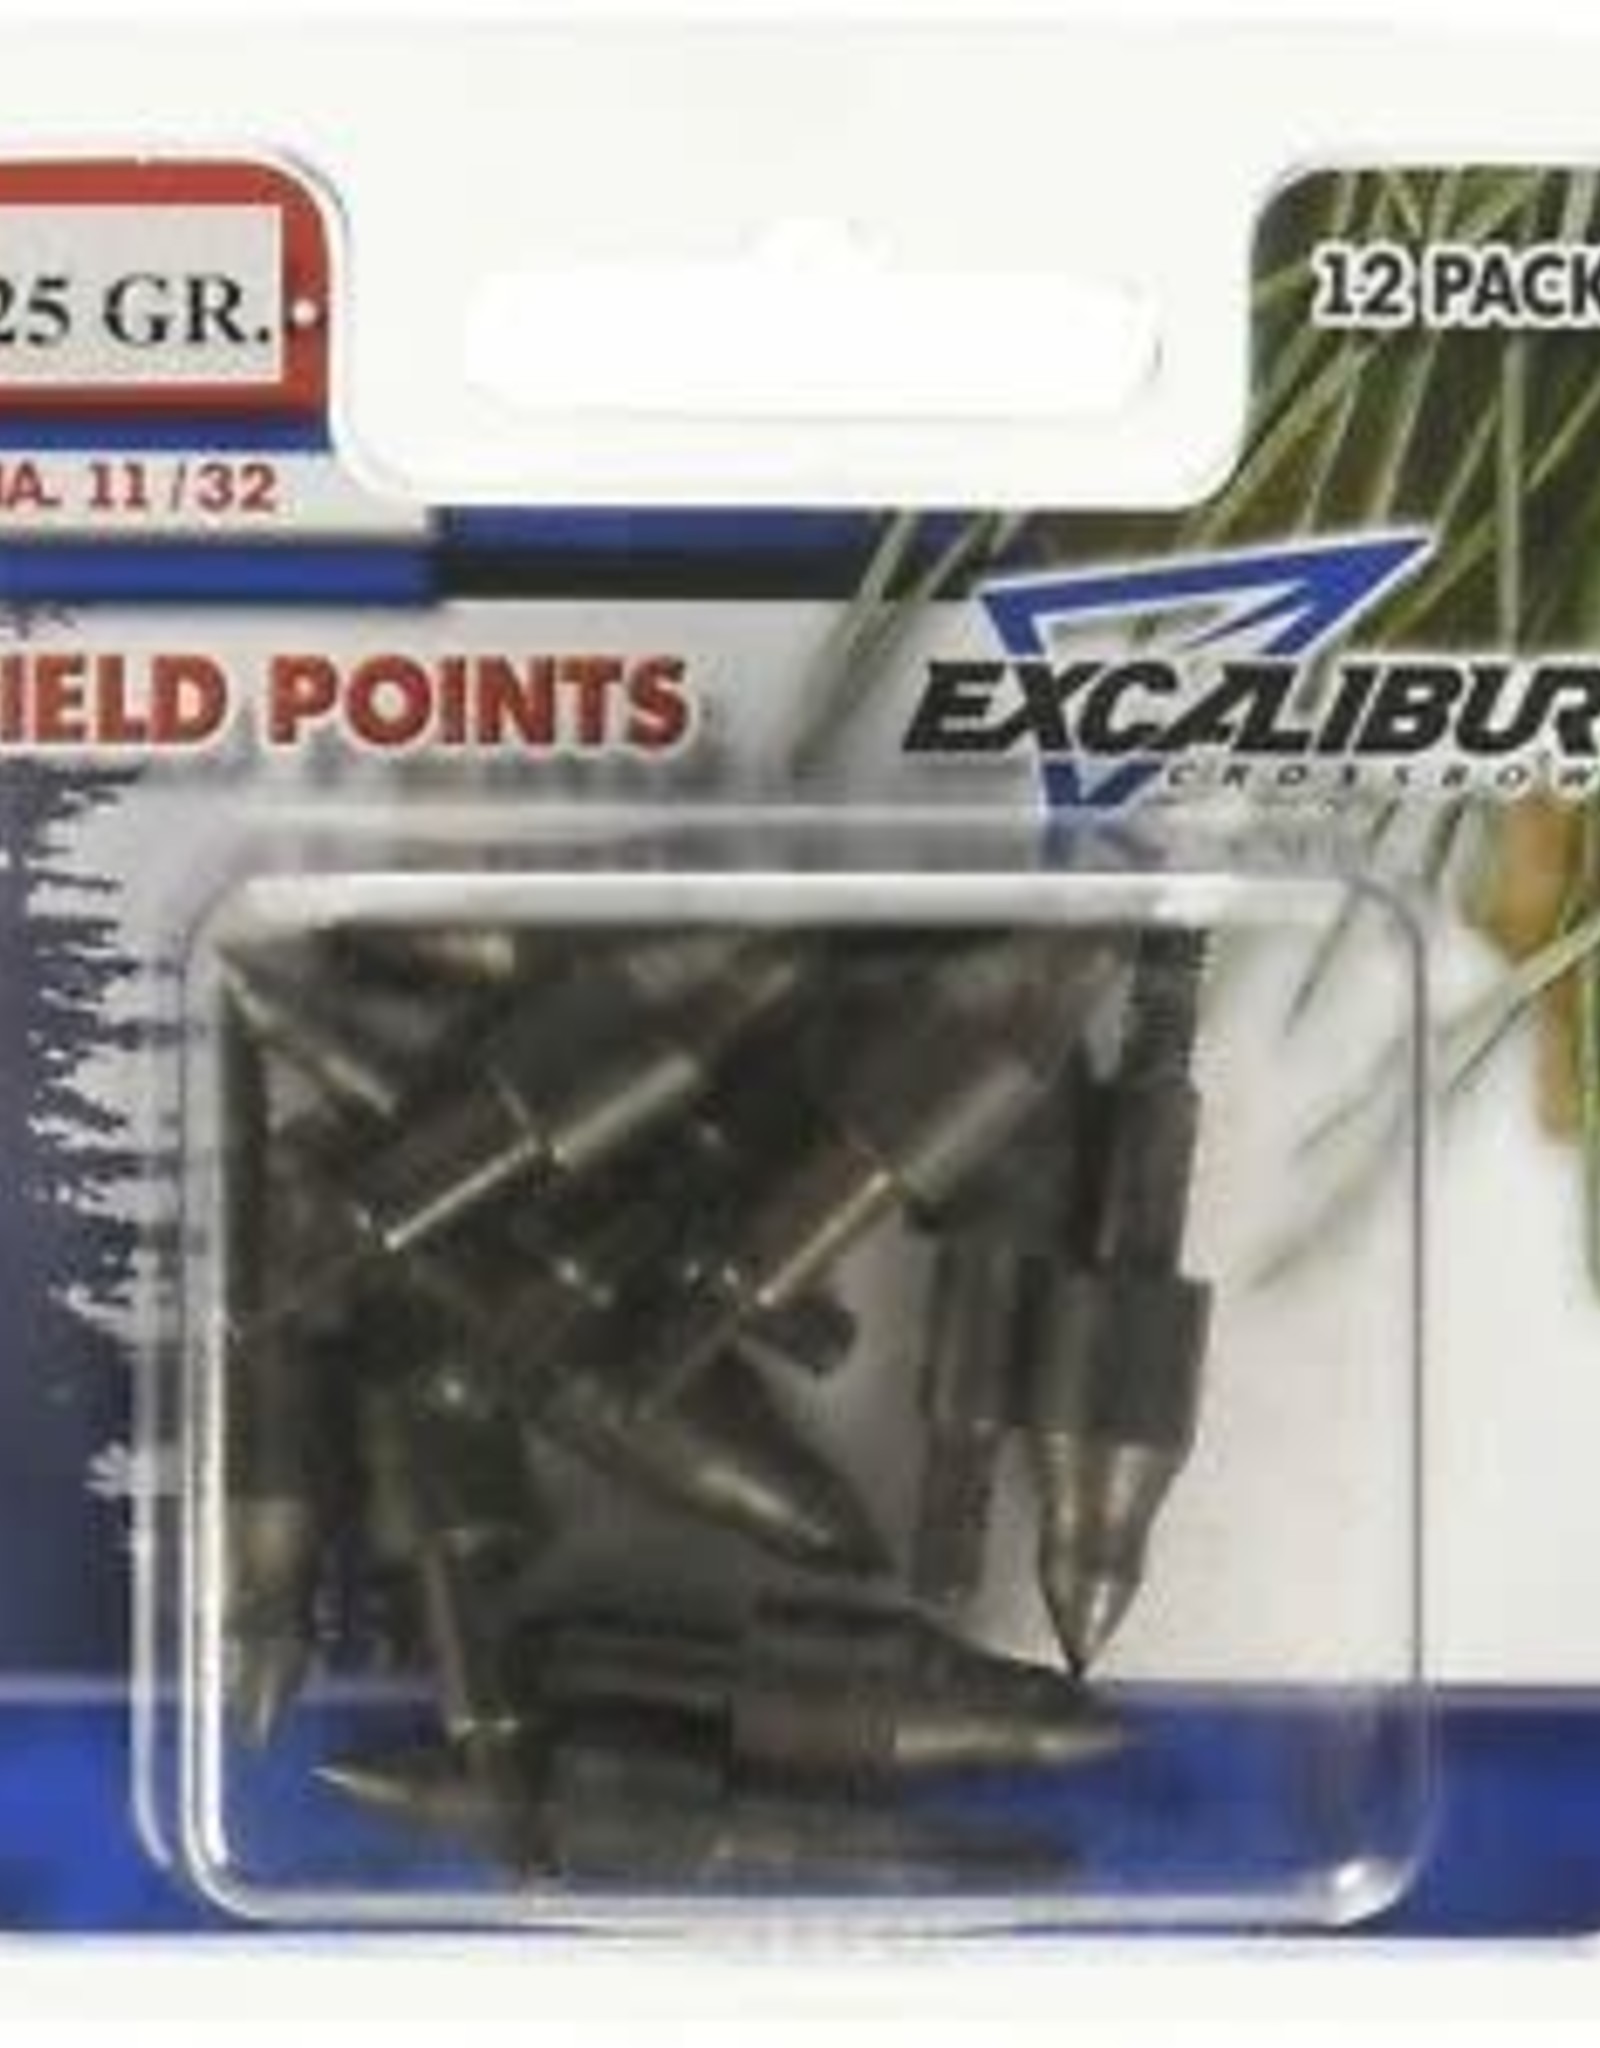 Excalibur Field Points, 21/64, 125 gr. (Package of 12)